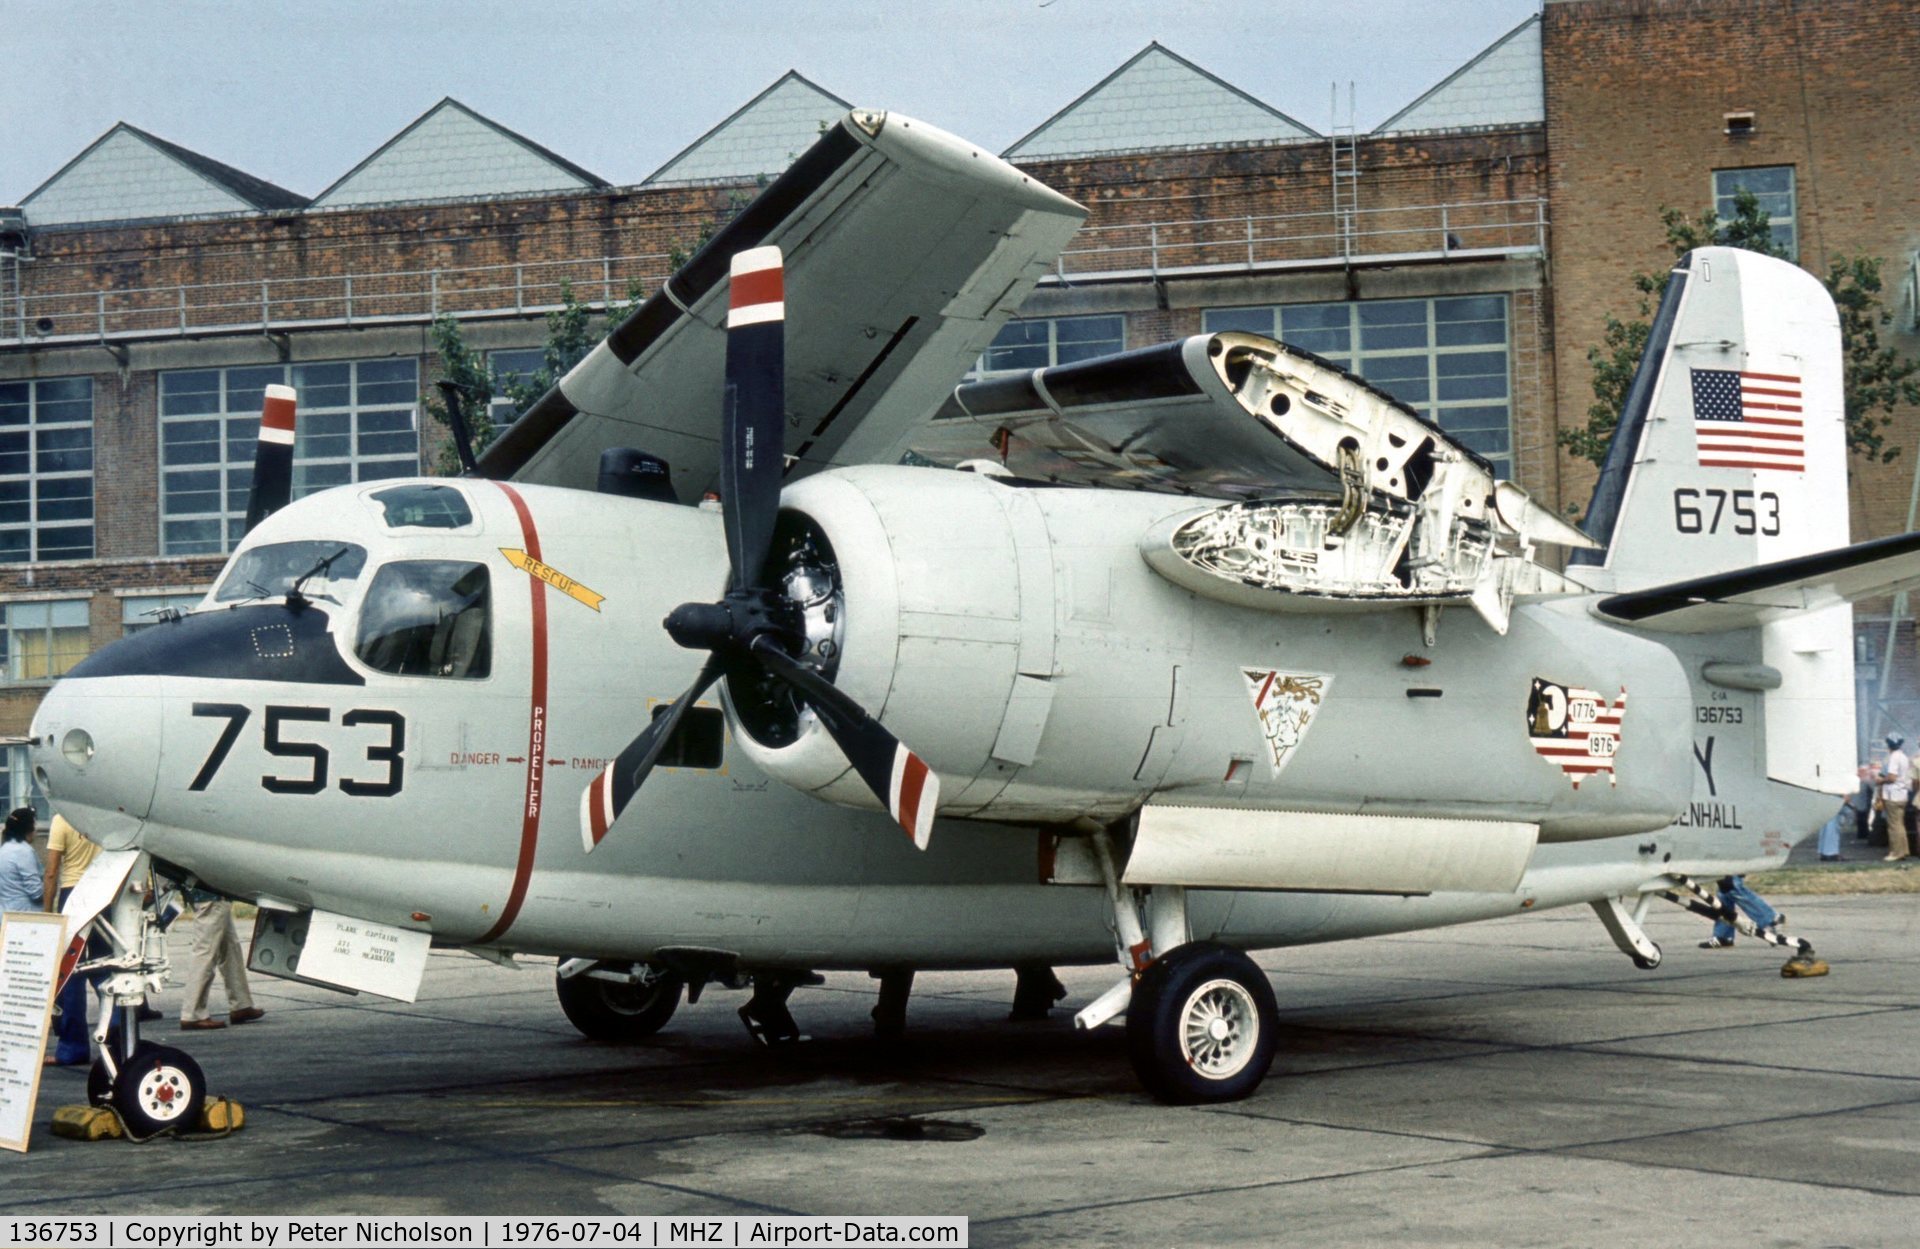 136753, Grumman C-1A Trader C/N 6, C-1A Trader of the Naval Air Facility at RAF Mildenhall at the 1976 Air Fete, complete with Bi-Centennial markings on the engine nacelle.